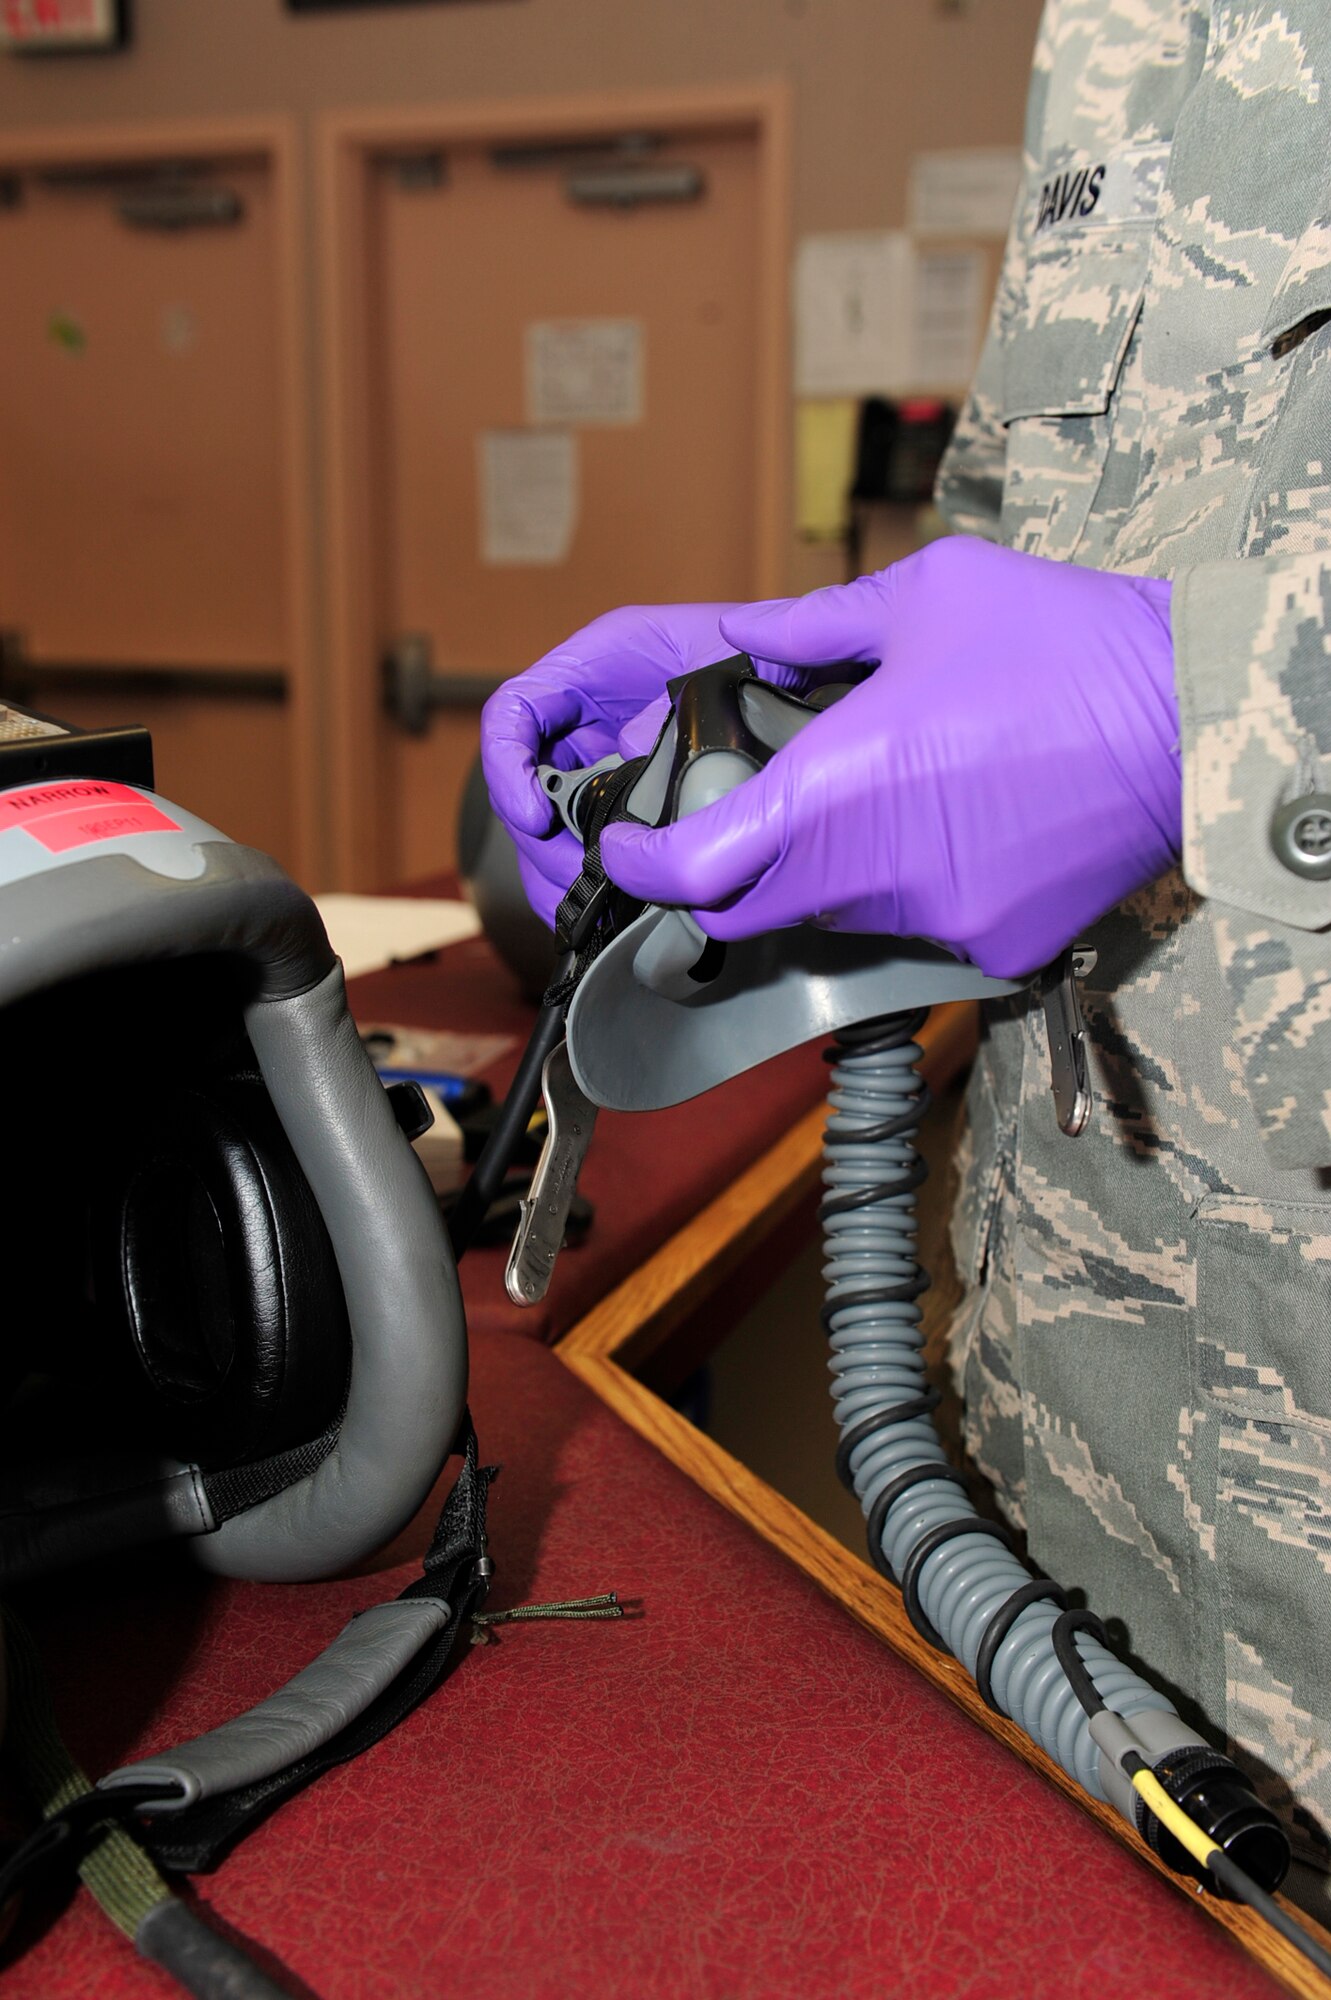 United States Air Force Staff Sgt. Nathan Davis, an aircrew flight equipment technician with the 18th Operations Support Squadron, Kadena Air Force Base, Japan, conducts a periodic inspection on an HGU-55P helmet during the Northern Edge Premier Joint Training Exercise, at Eielson Air Force Base, Alaska, June 21. More than 6,000 active duty, Reserve and National Guard personnel are participating in Northern Edge 2011. (U.S. Air Force photo/Staff Sgt. Lakisha A. Croley)